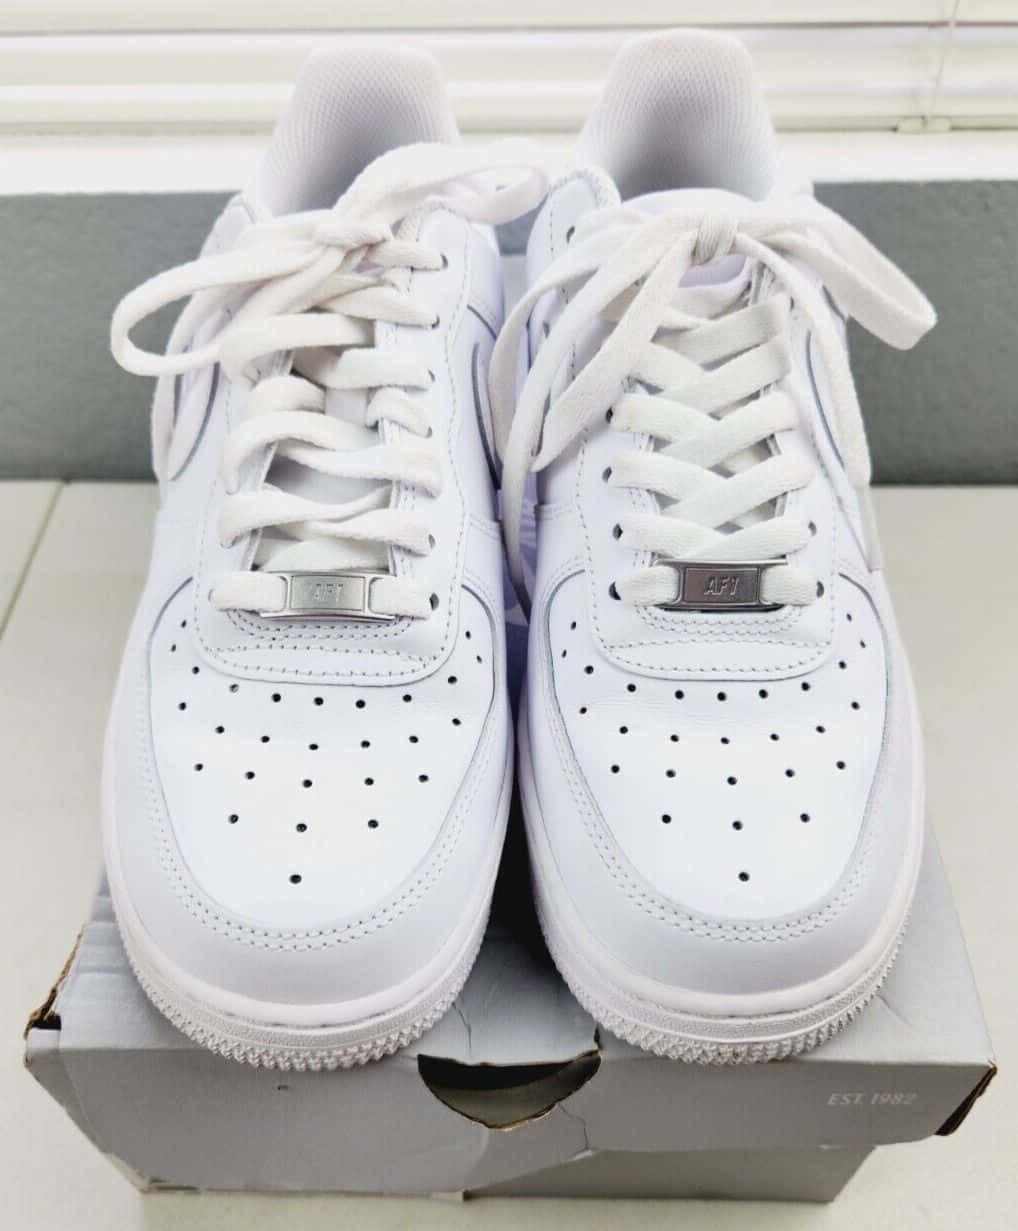 Fotofrontale Delle Nike Air Force 1 Bianche